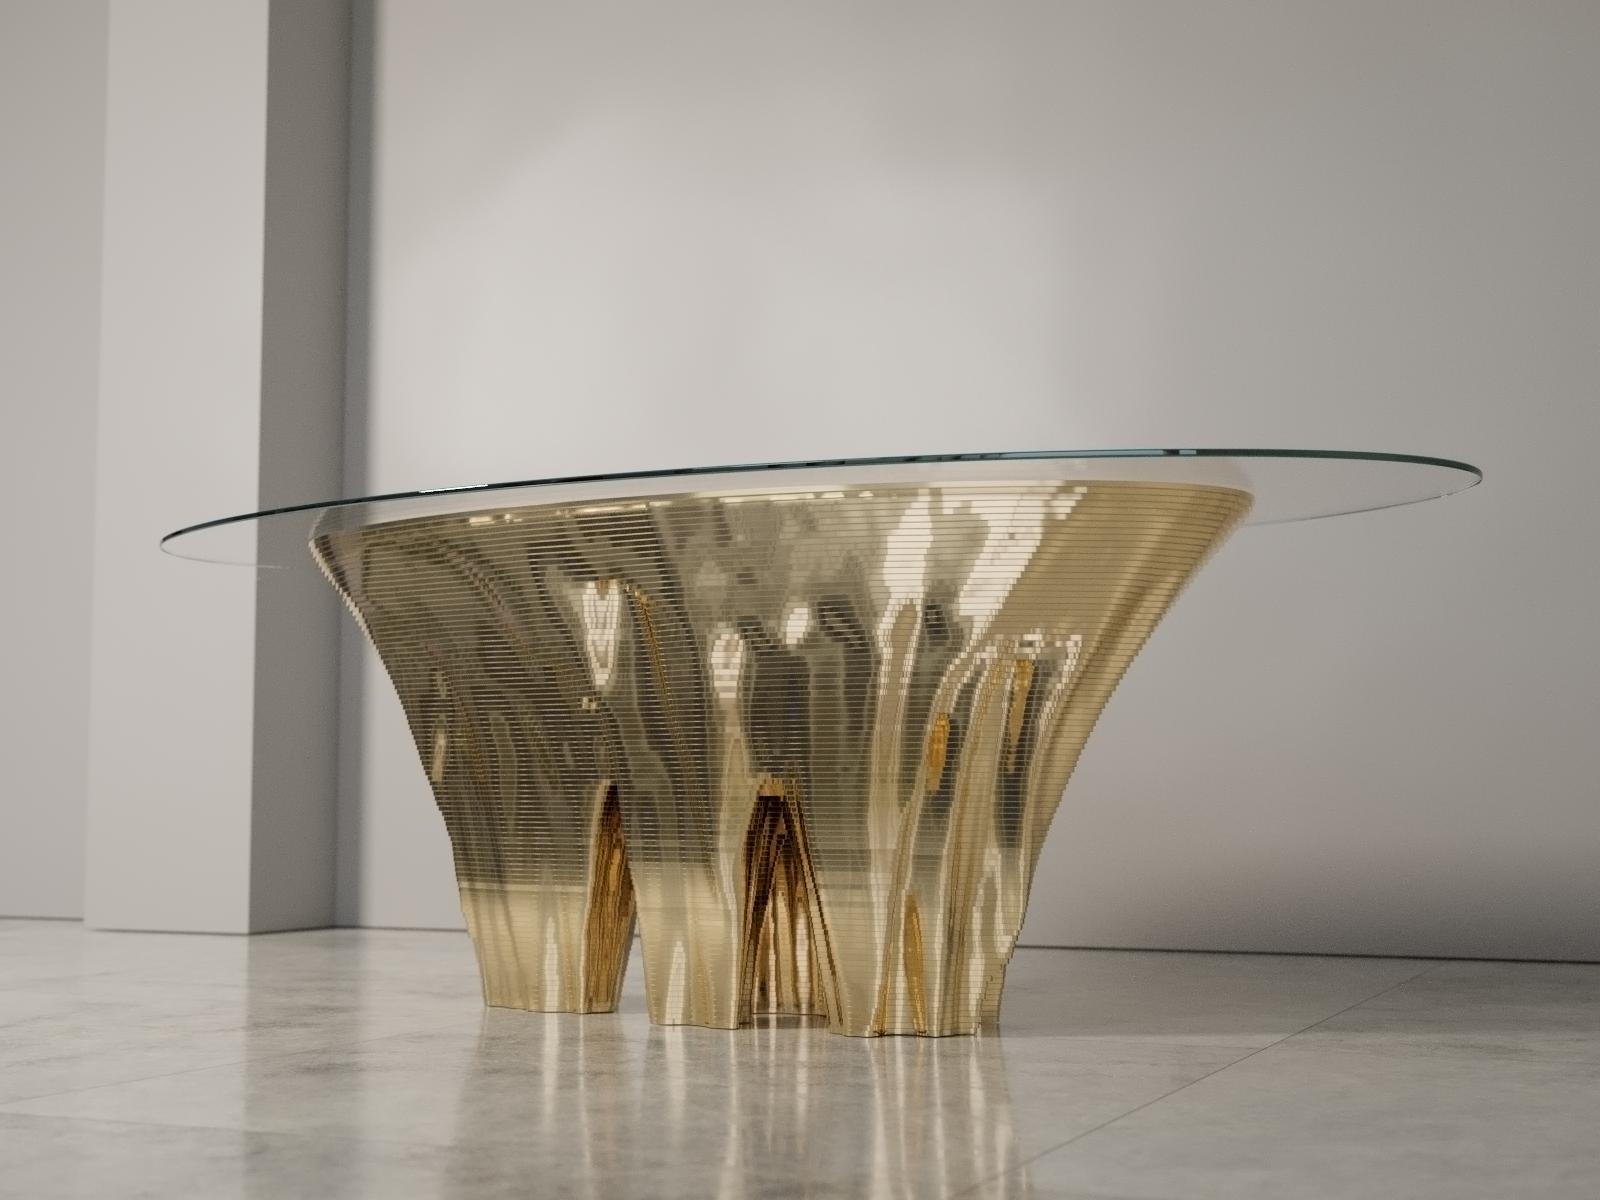 Gold monument valley dining table by Duffy London
Limited edition
Dimensions: W 270 x D 120 x H 75 cm
Materials: marble, glass.
Also available: various marble finishes available upon request.

The monument valley dining table is limited to 25